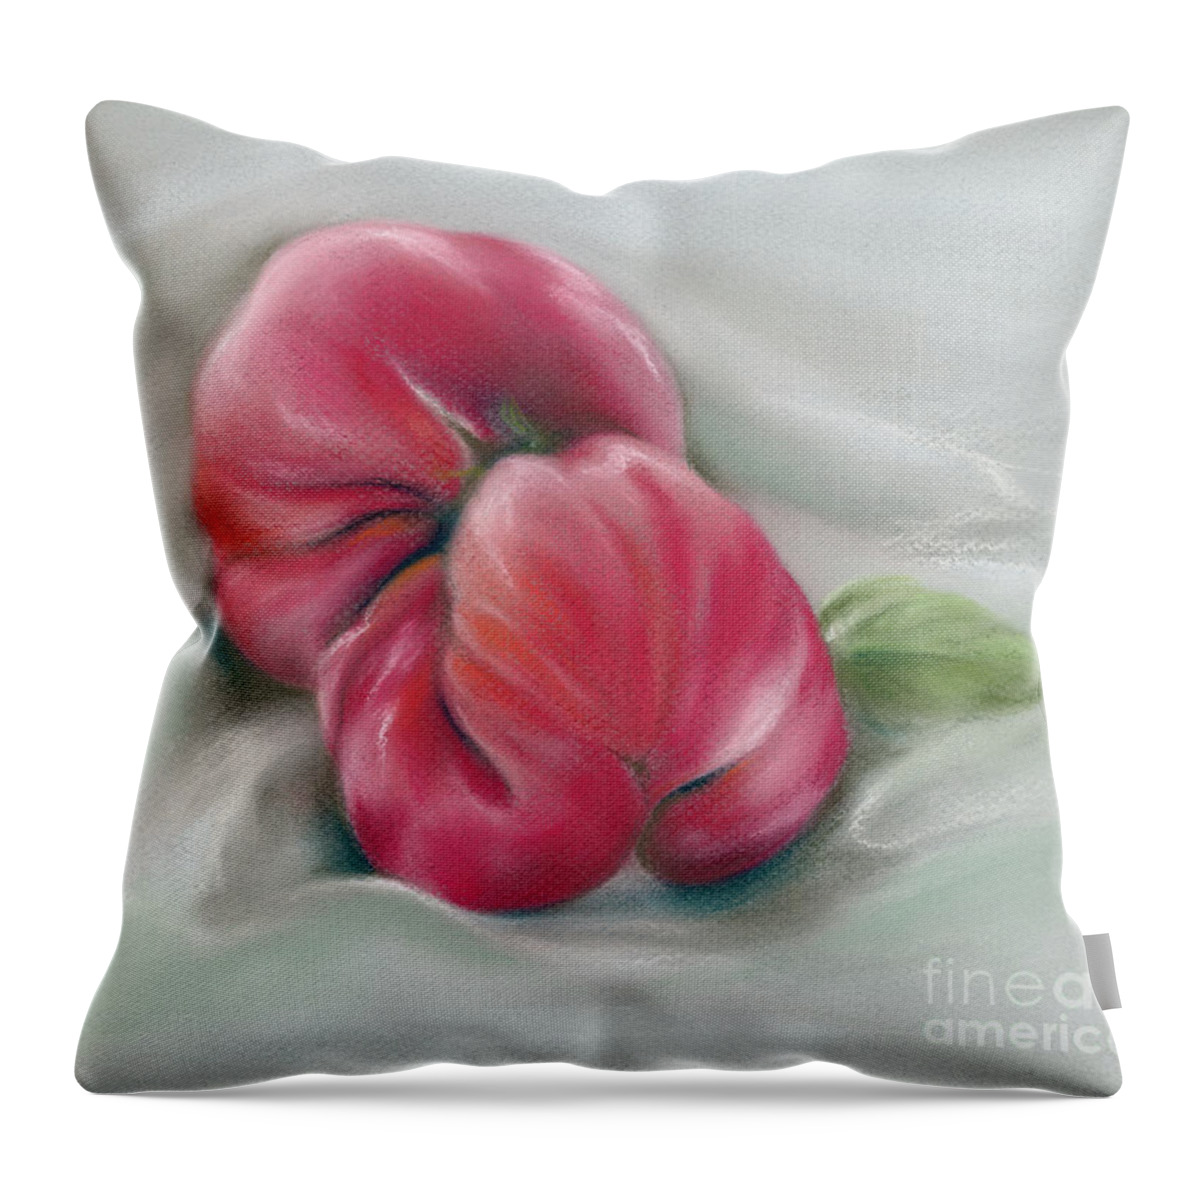 Tomato Throw Pillow featuring the painting Heirloom Tomato with Basil Leaf by MM Anderson